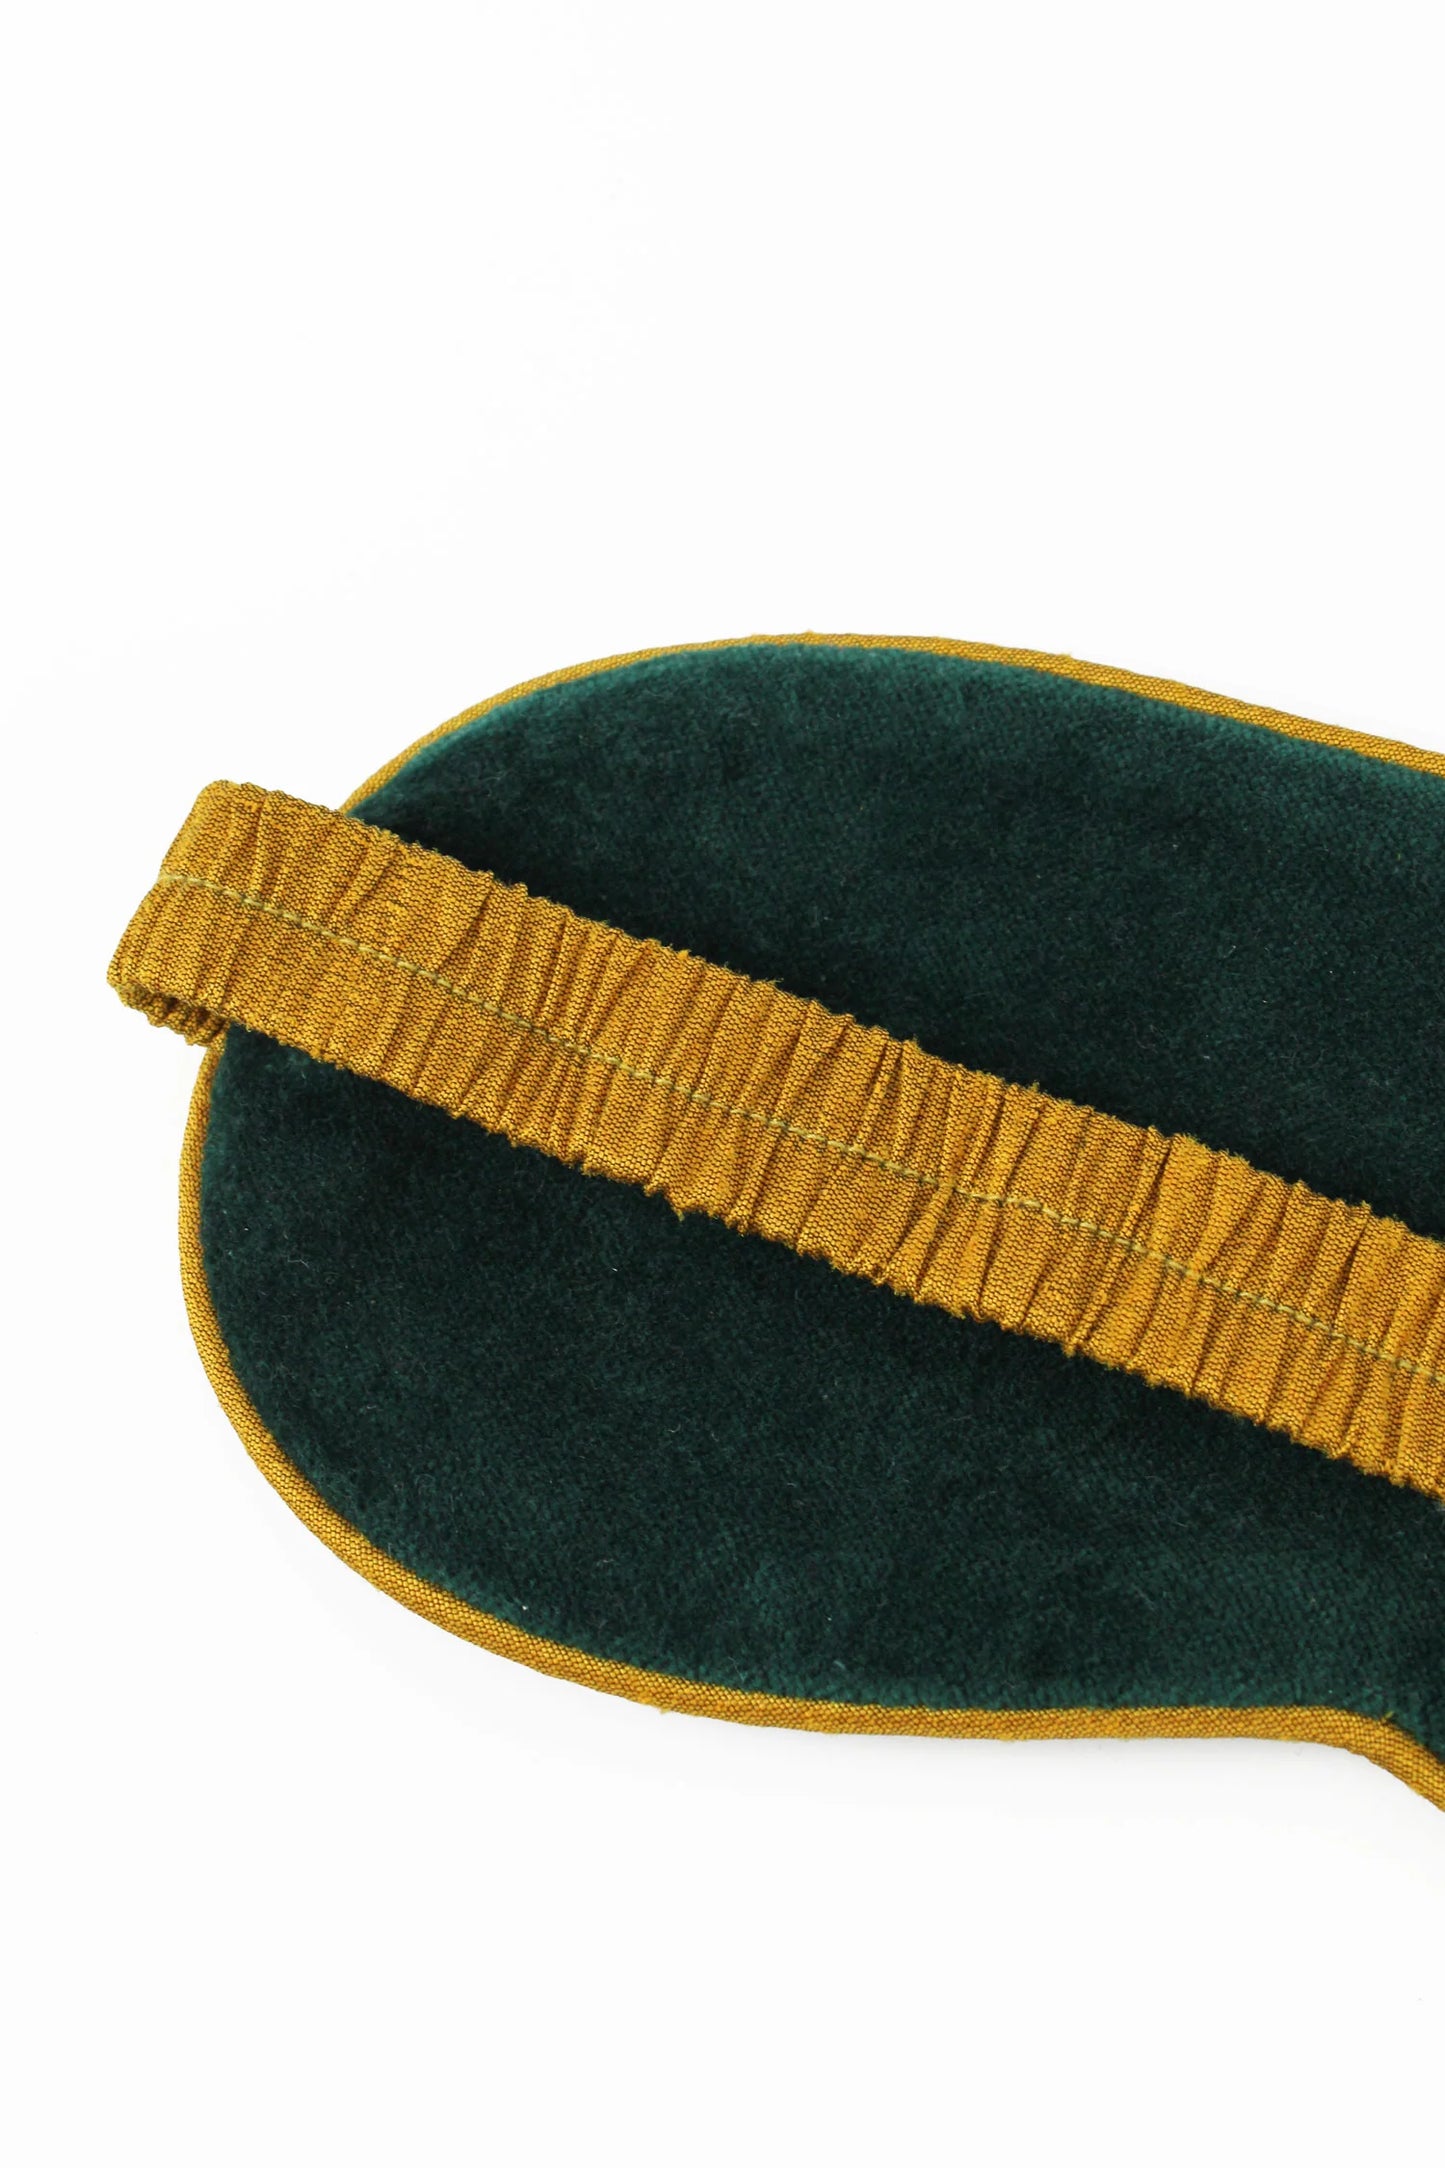 Back of eye mask showing the gold strap